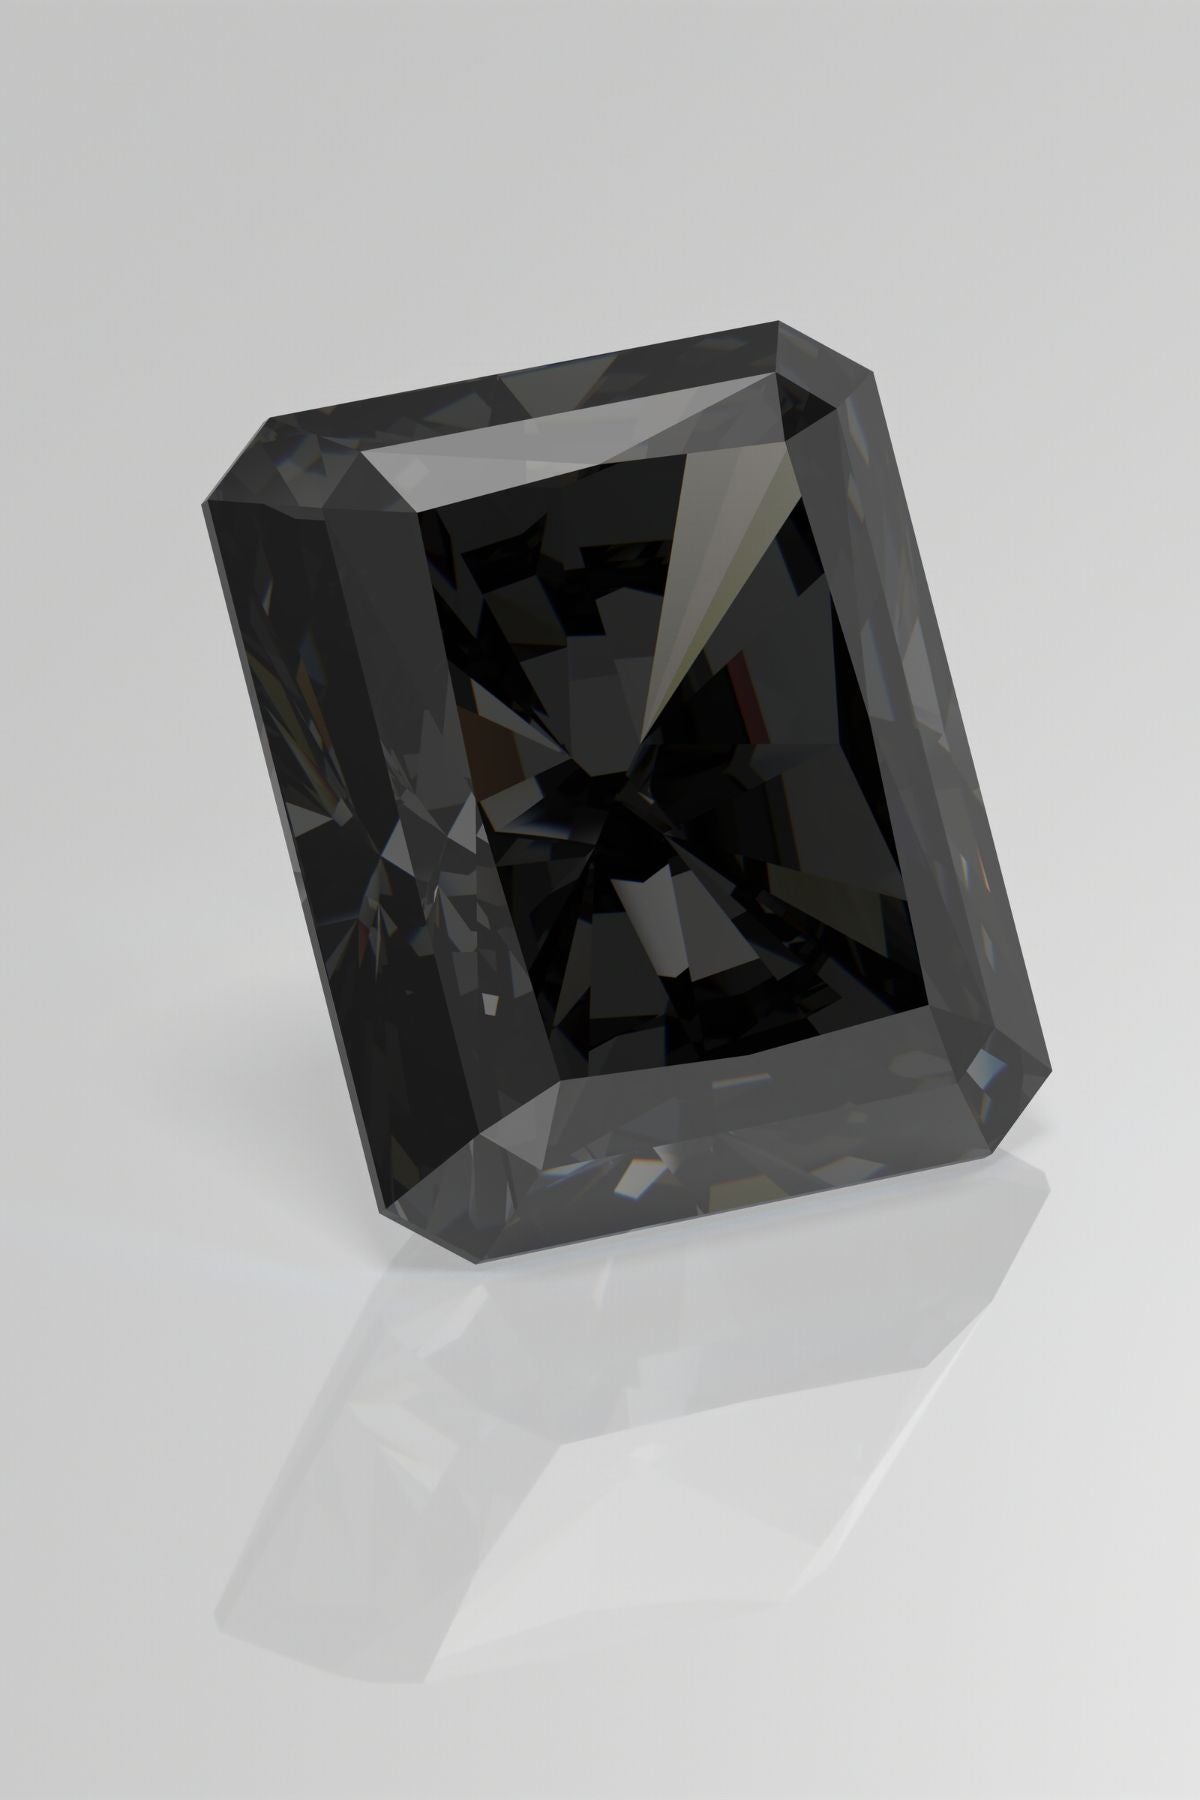 Real Black Diamonds. Are Black Diamonds Real? Why Are They Cheap?